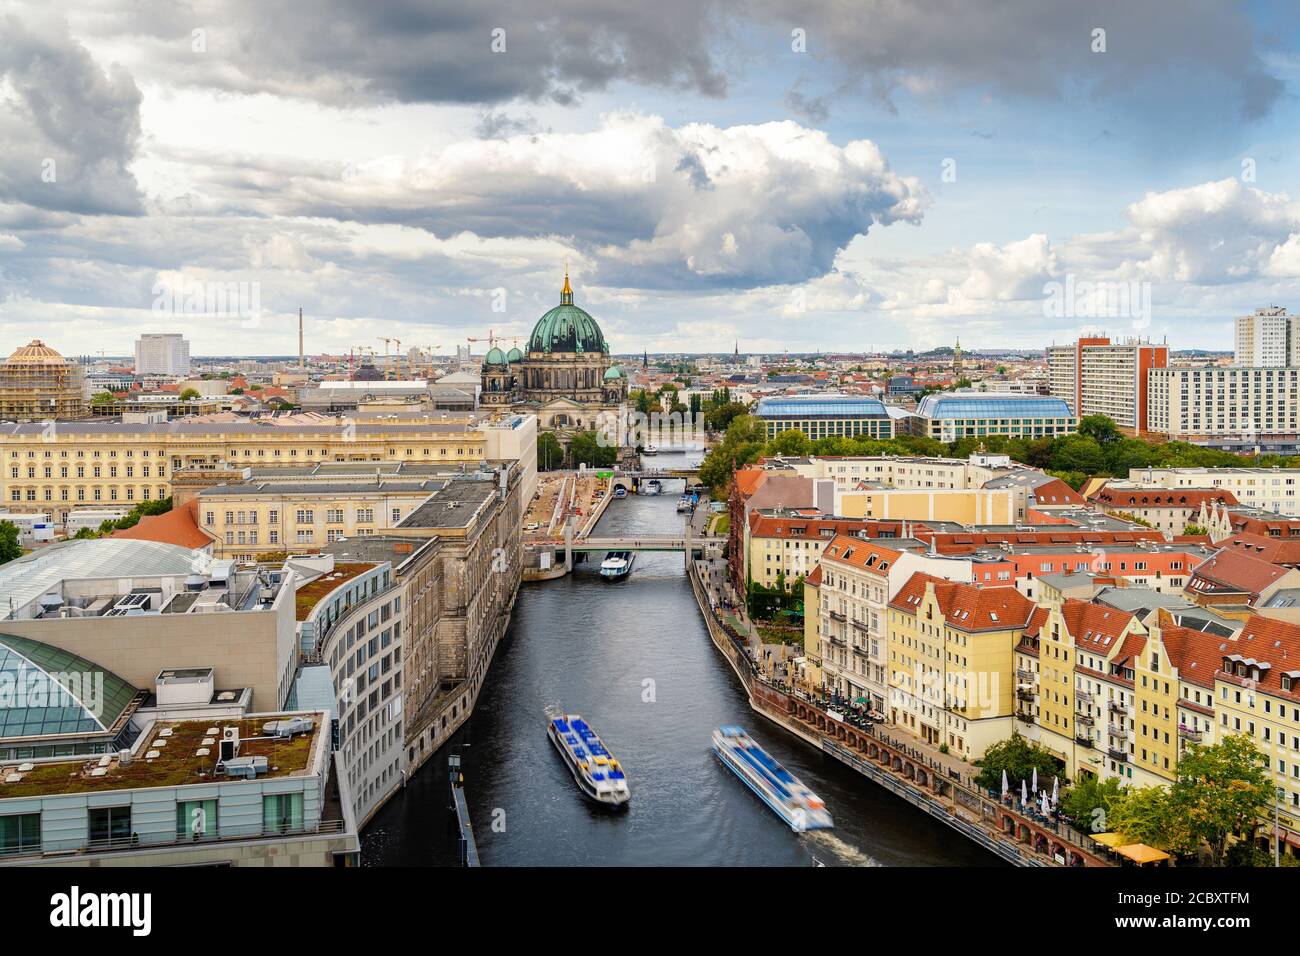 Panoramic view of Berlin, Germany, showing historical landmark Berlin Cathedral (German: Berliner Dom ) and tour boats on the Spree River. Stock Photo